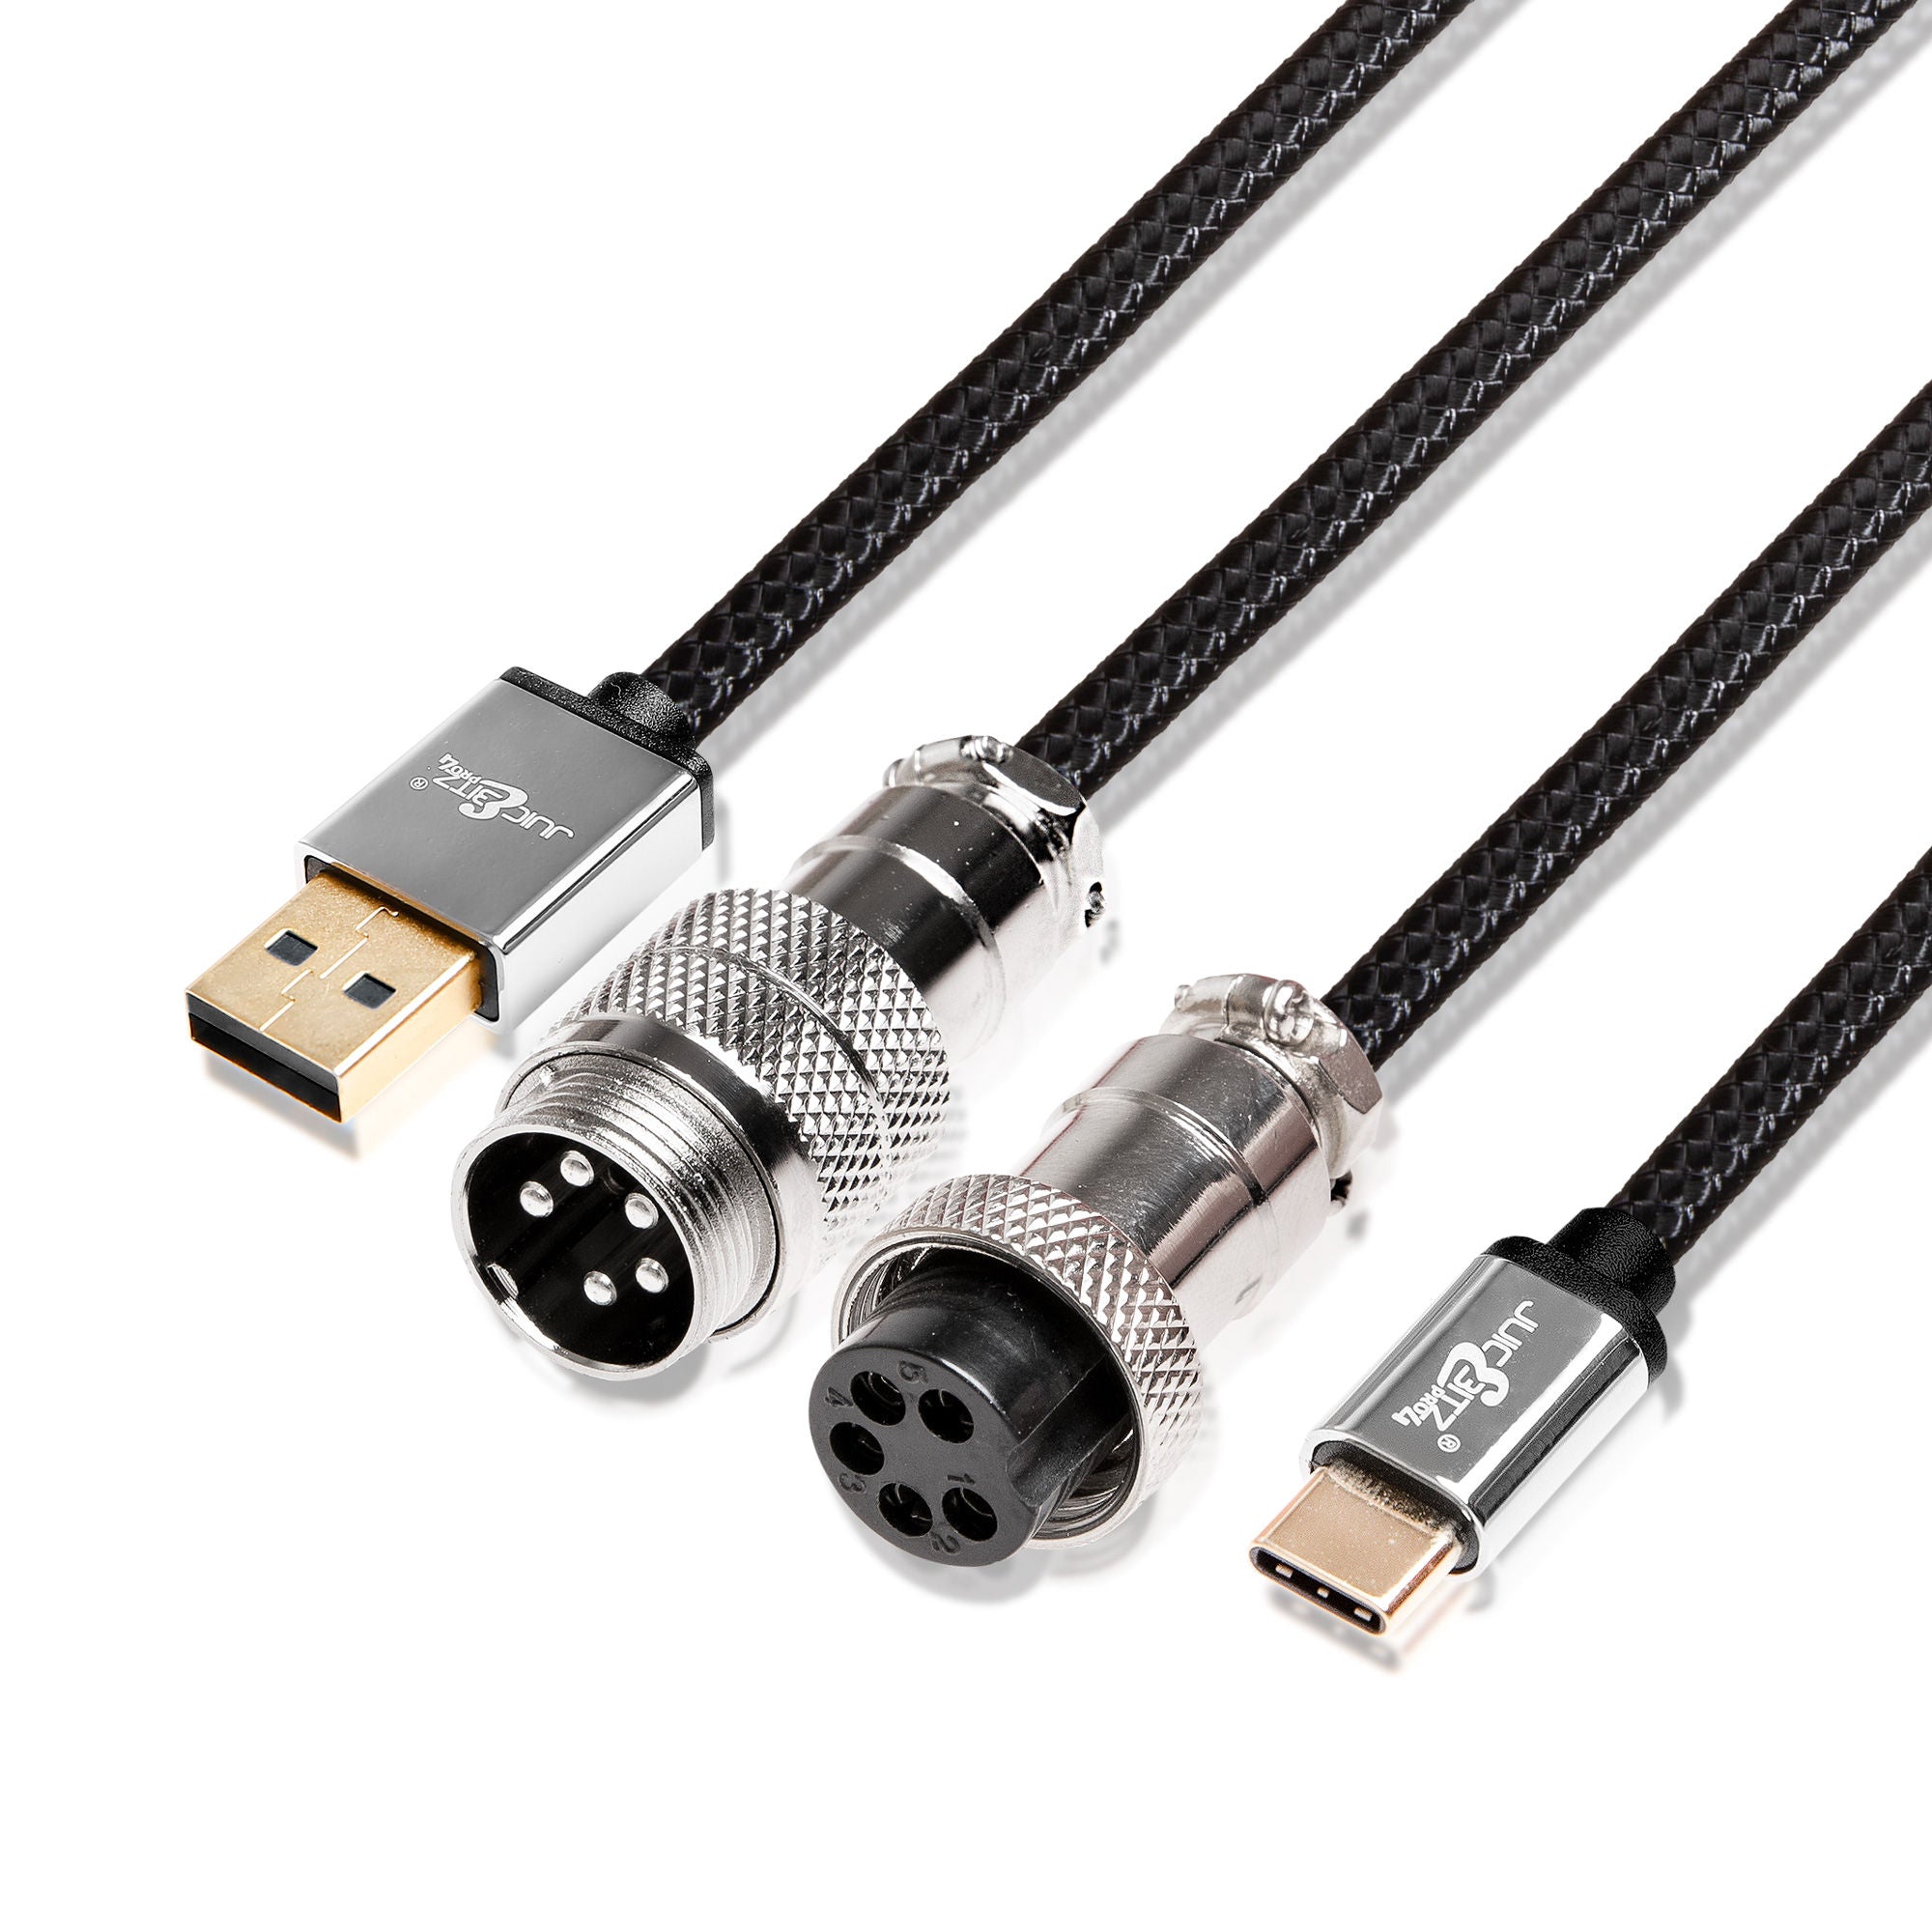 PRO Series Retractable Coiled USB 2.0 to GX16 + GX16 to USB-C Cable for Mechanical Keyboard - Black